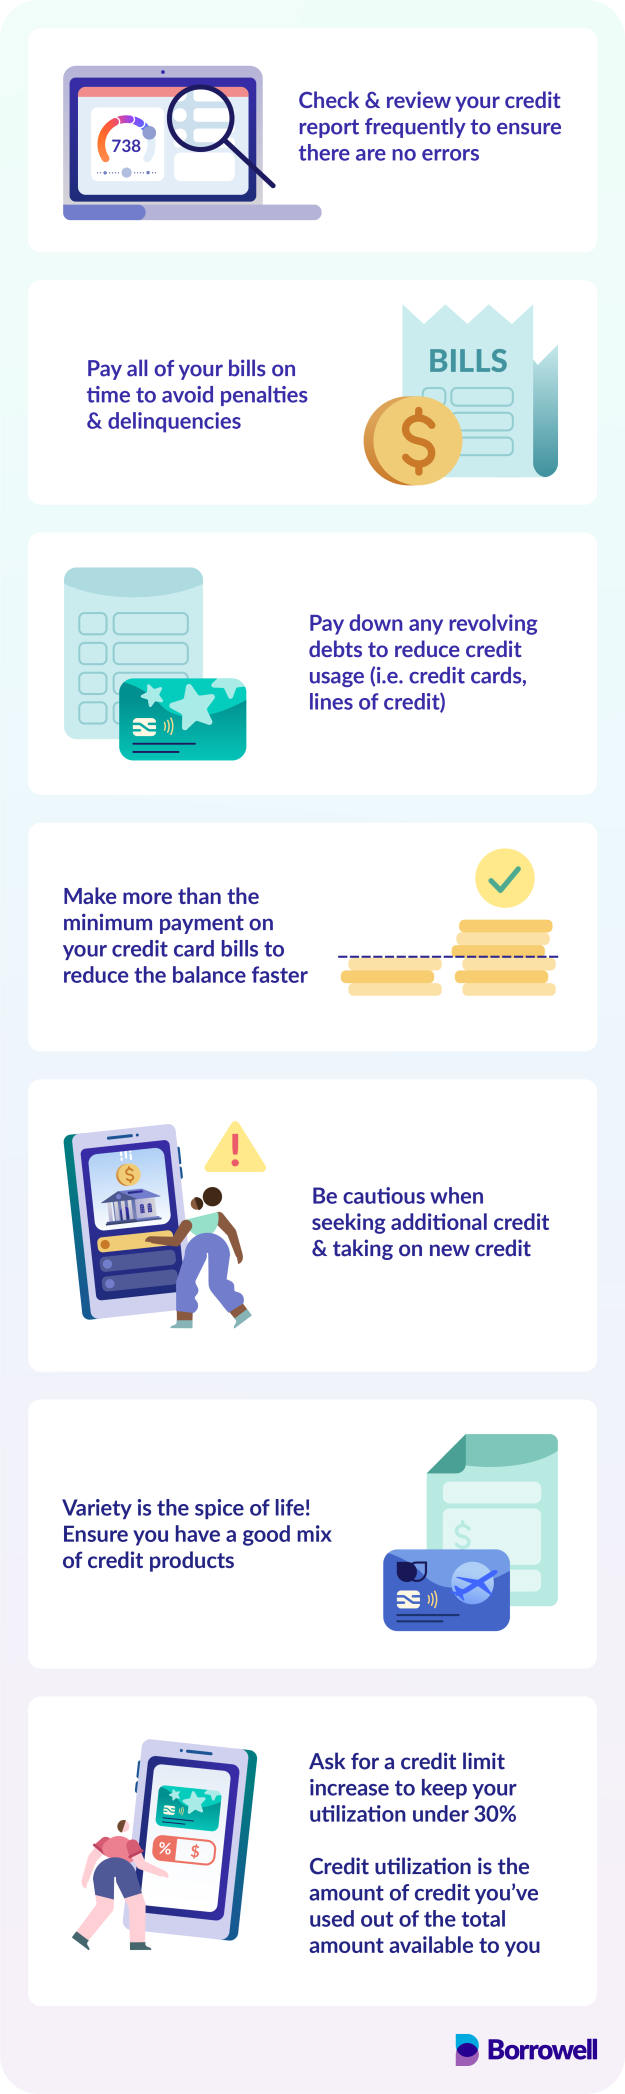 Tips for Your Credit Health: 
1. Check and view your credit report frequently to ensure there are no errors.
2. Pay all of your bills on time to avoid penalties and delinquencies.
3. Pay down any revolving debts to reduce credit usage (ie. credit cards, lines of credit).
4. Make more than the minimum payment on your credit card bills to reduce the balance faster.
5. Be cautious when seeking additional credit and taking on new credit.
6. Variety is the spice of life! Ensure you have a good mix of credit products.
7. Ask for a credit limit increase to keep your utilization under 30%. Credit utilization is the amount of credit you've used out of the total amount available to you.